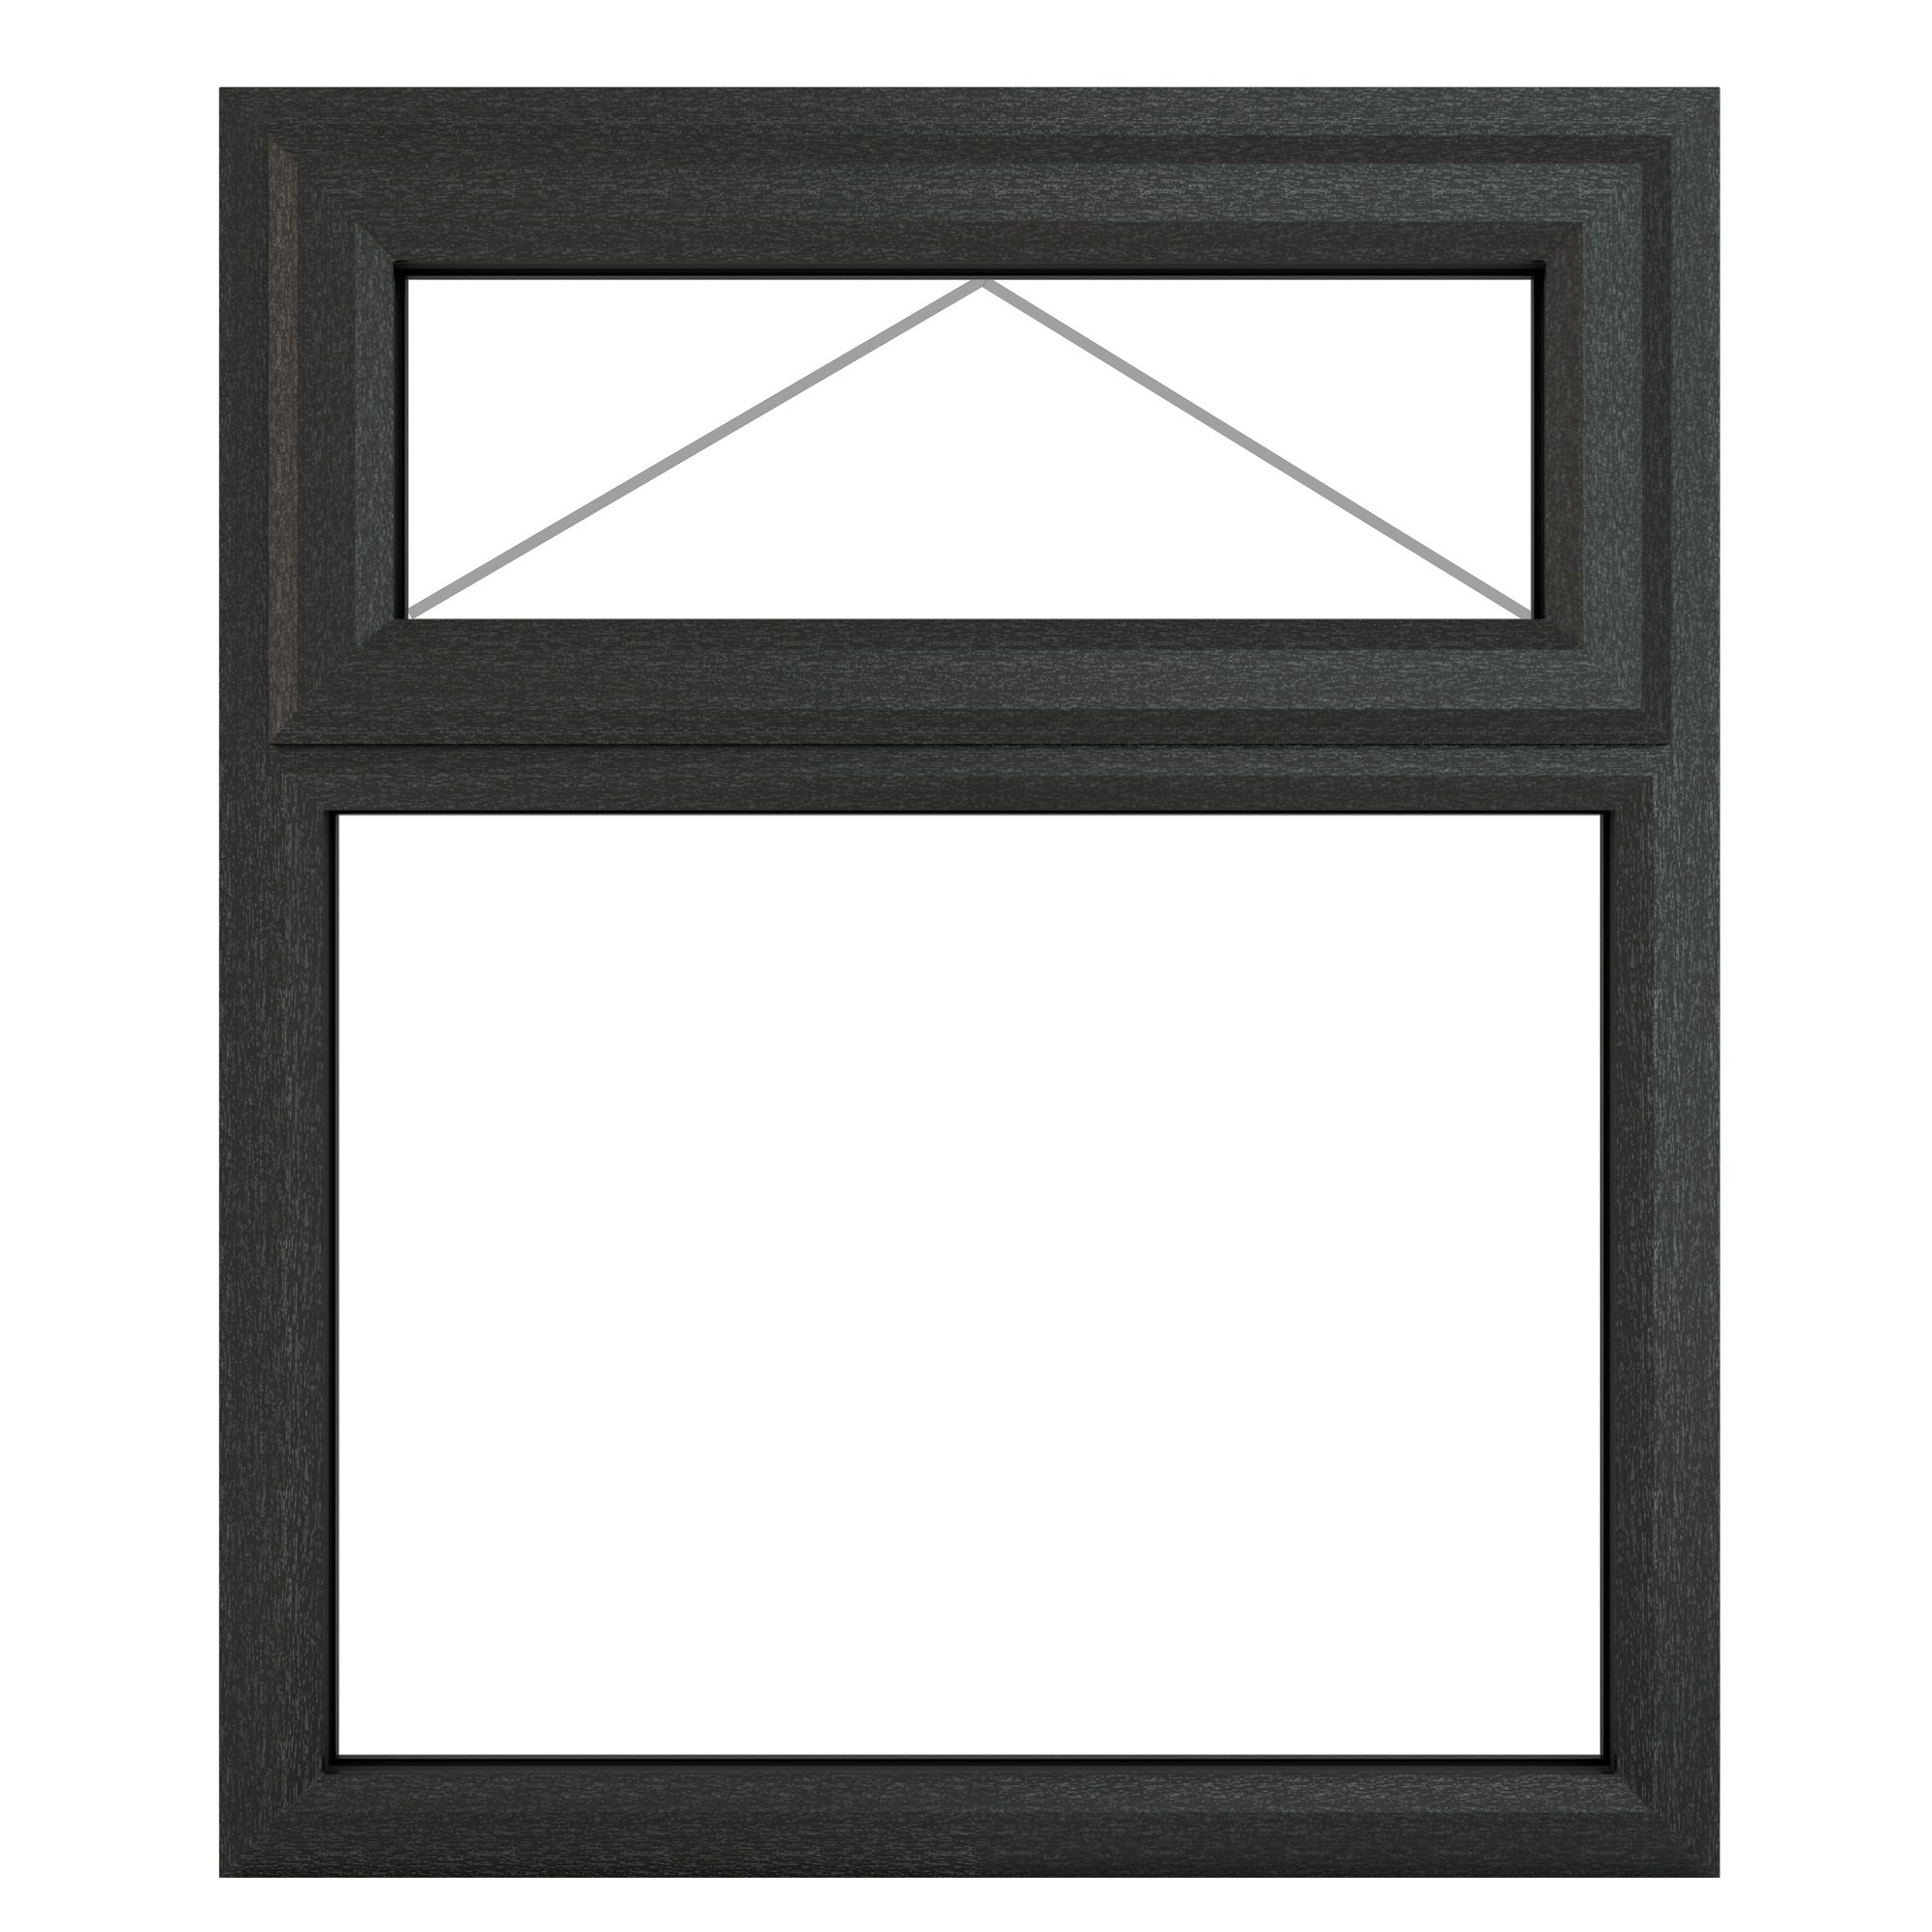 Fortia 2P Clear Glazed Anthracite uPVC Top hung Window, (H)965mm (W)1190mm